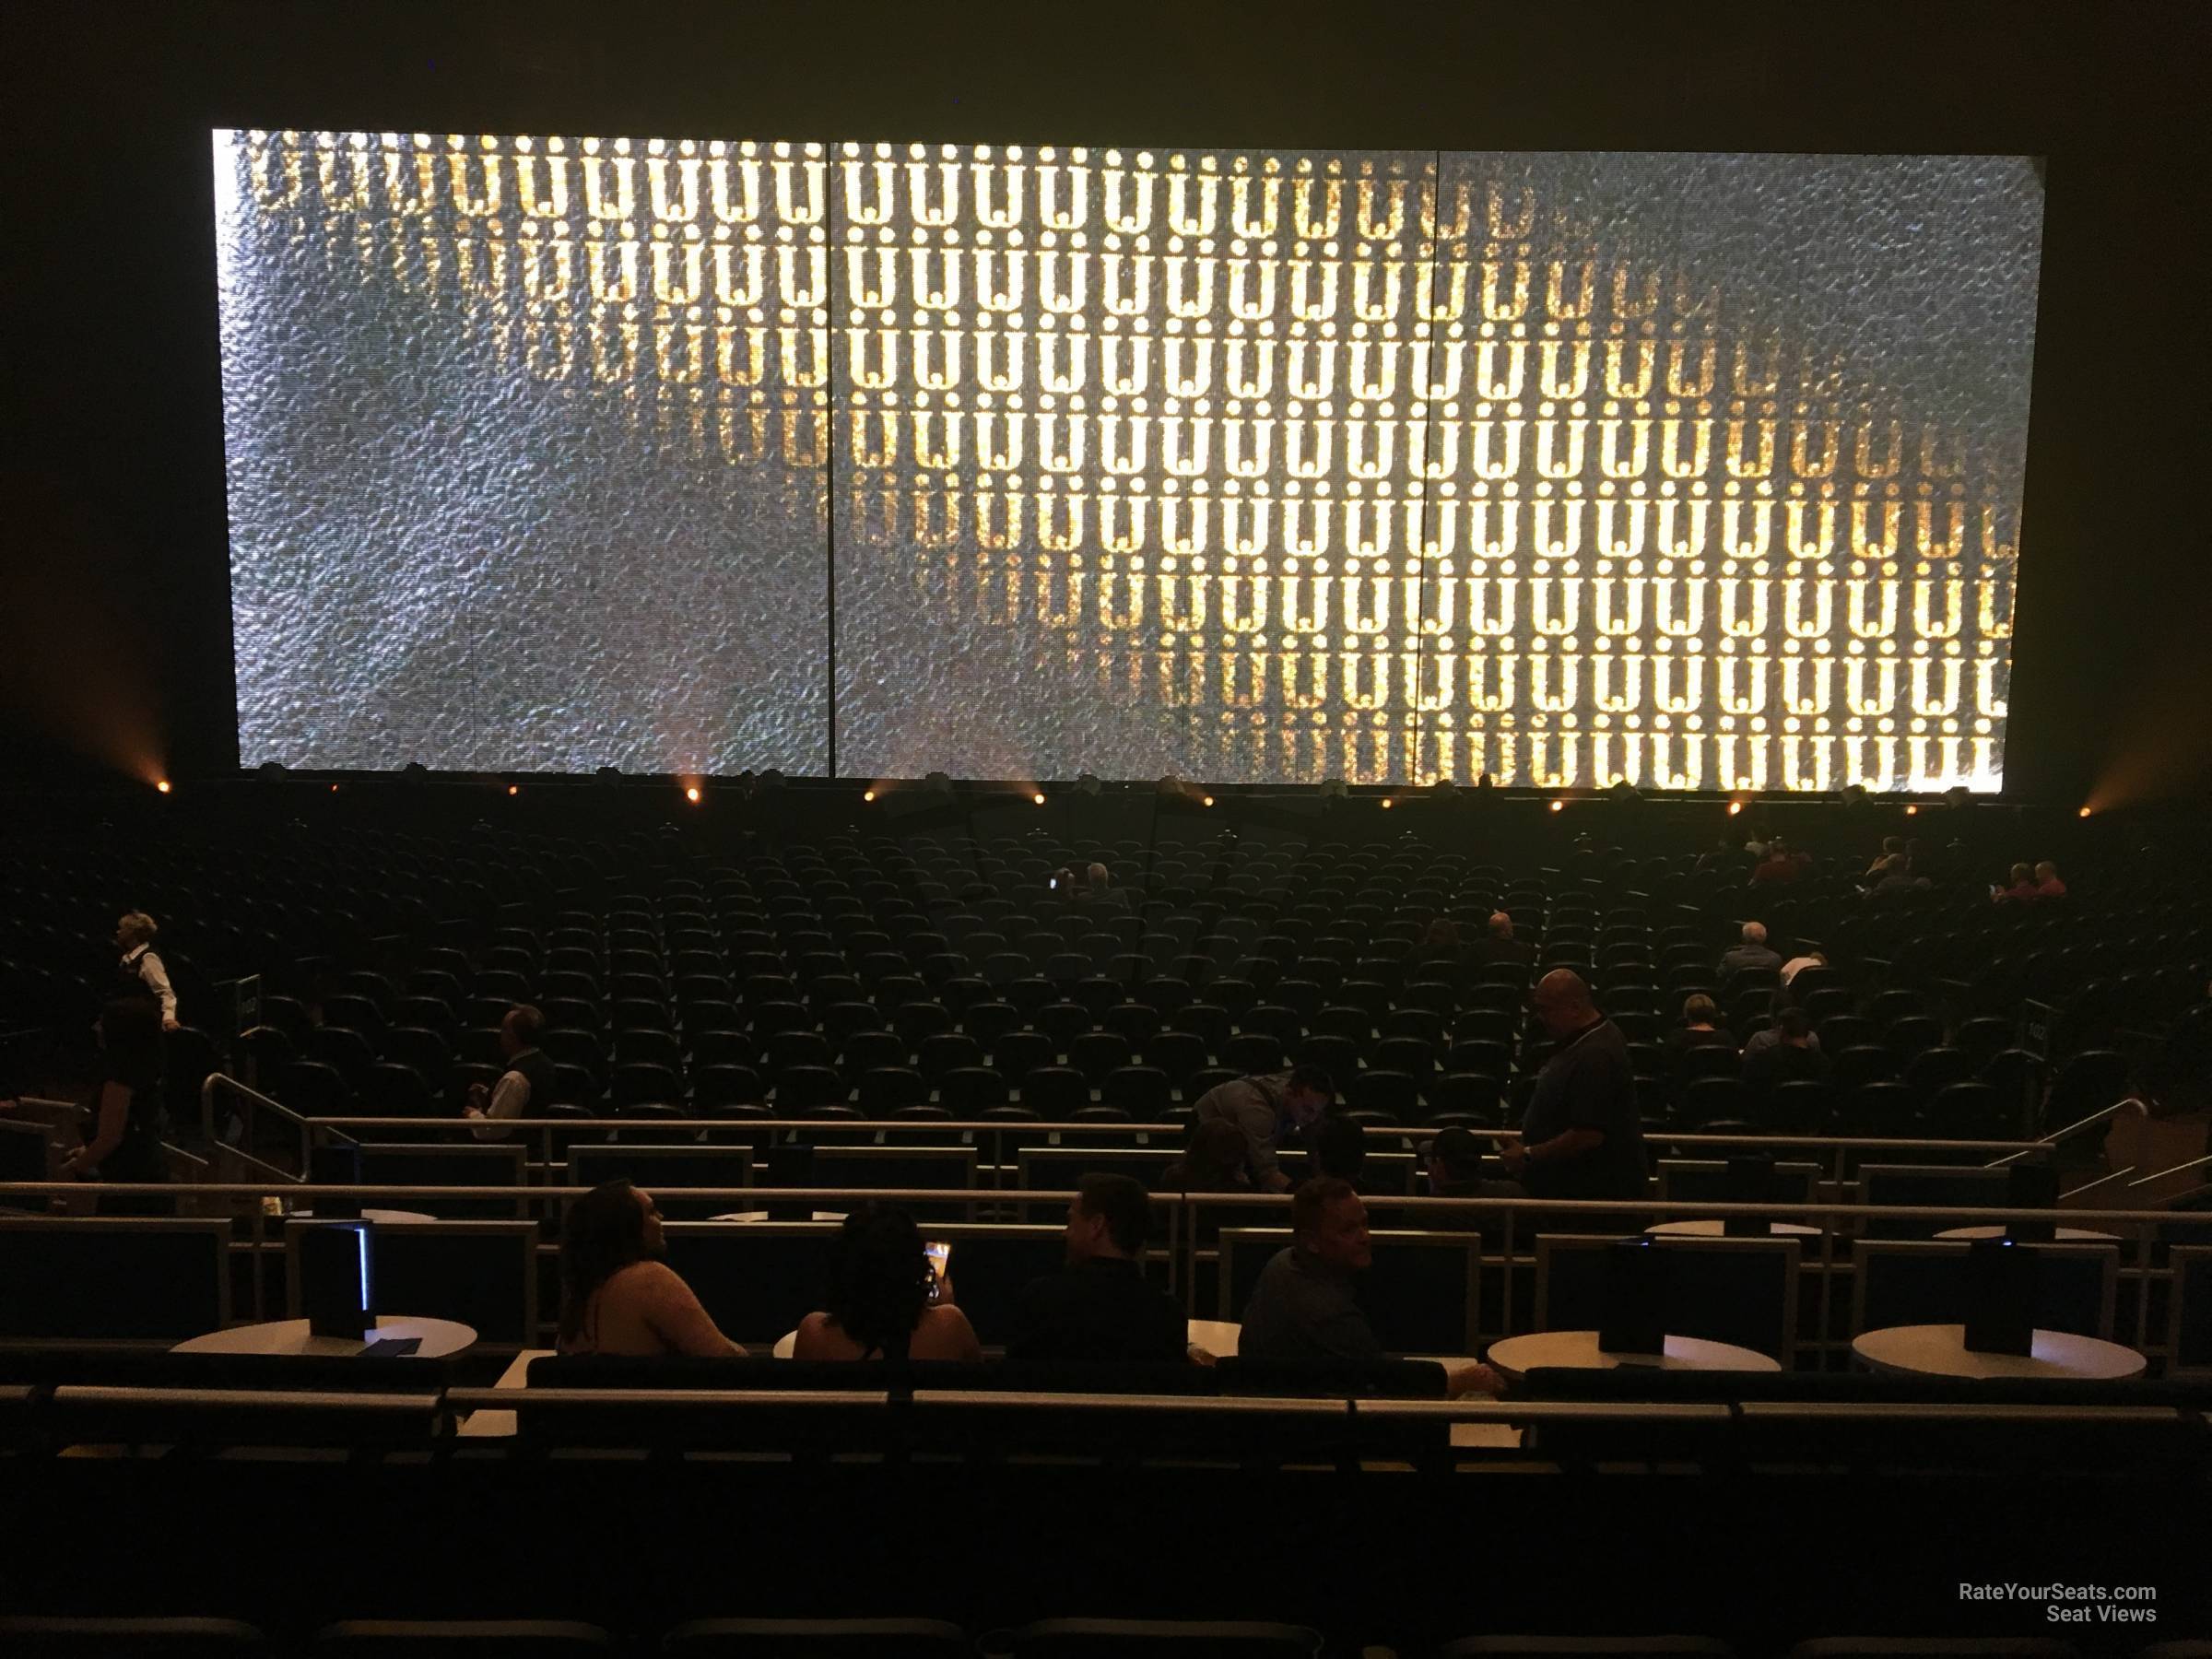 section 203, row k seat view  - dolby live at park mgm